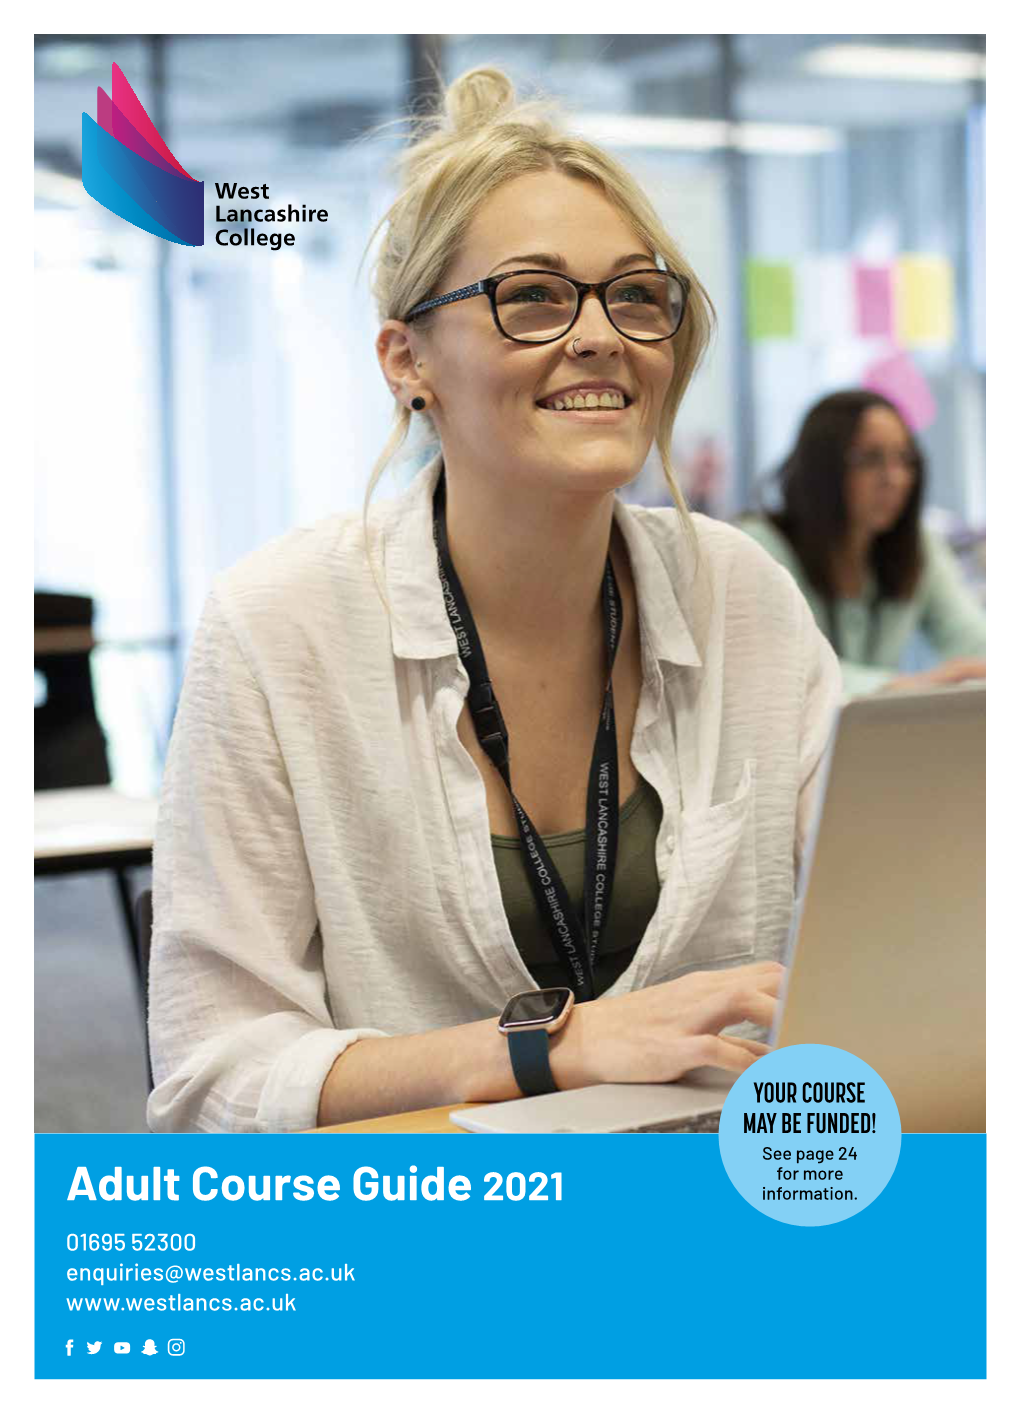 Adult Course Guide 2021 Information